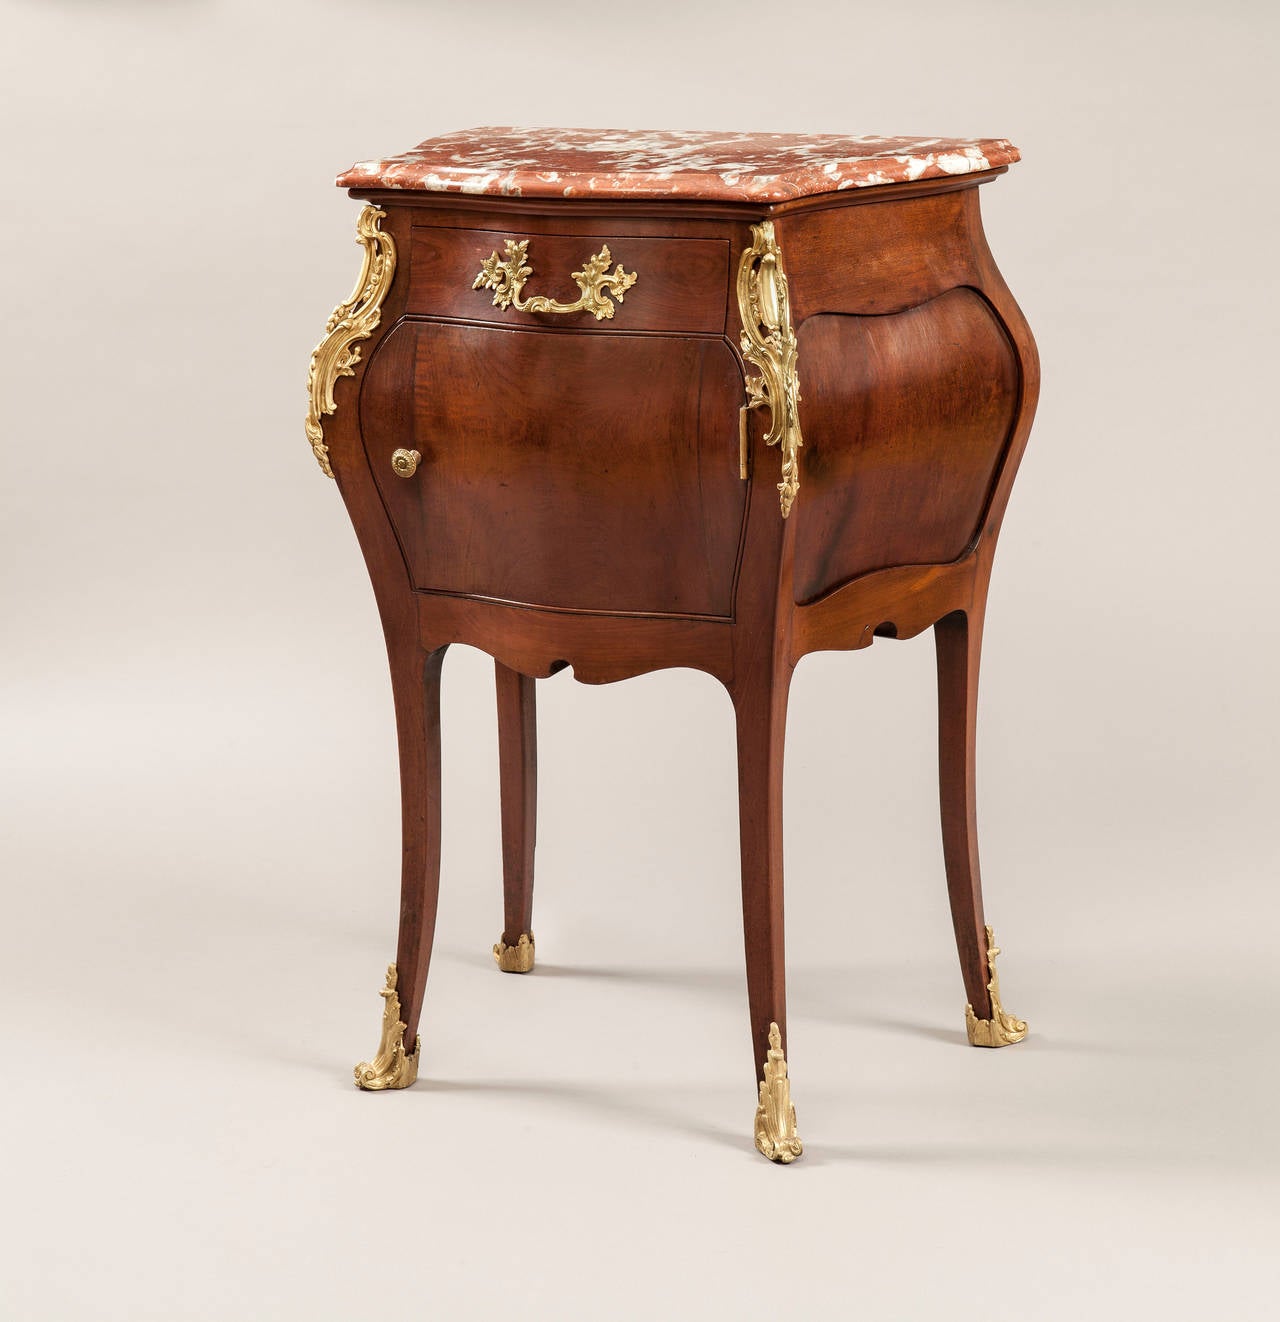 Pair of bedside cupboards in the Louis XV manner

Of shaped form, being constructed in mahogany, with gilt bronze accents, rising from cabriole legs, dressed with gilt bronze sabots and espagnolettes; the corps of bombe form, with fielded panel